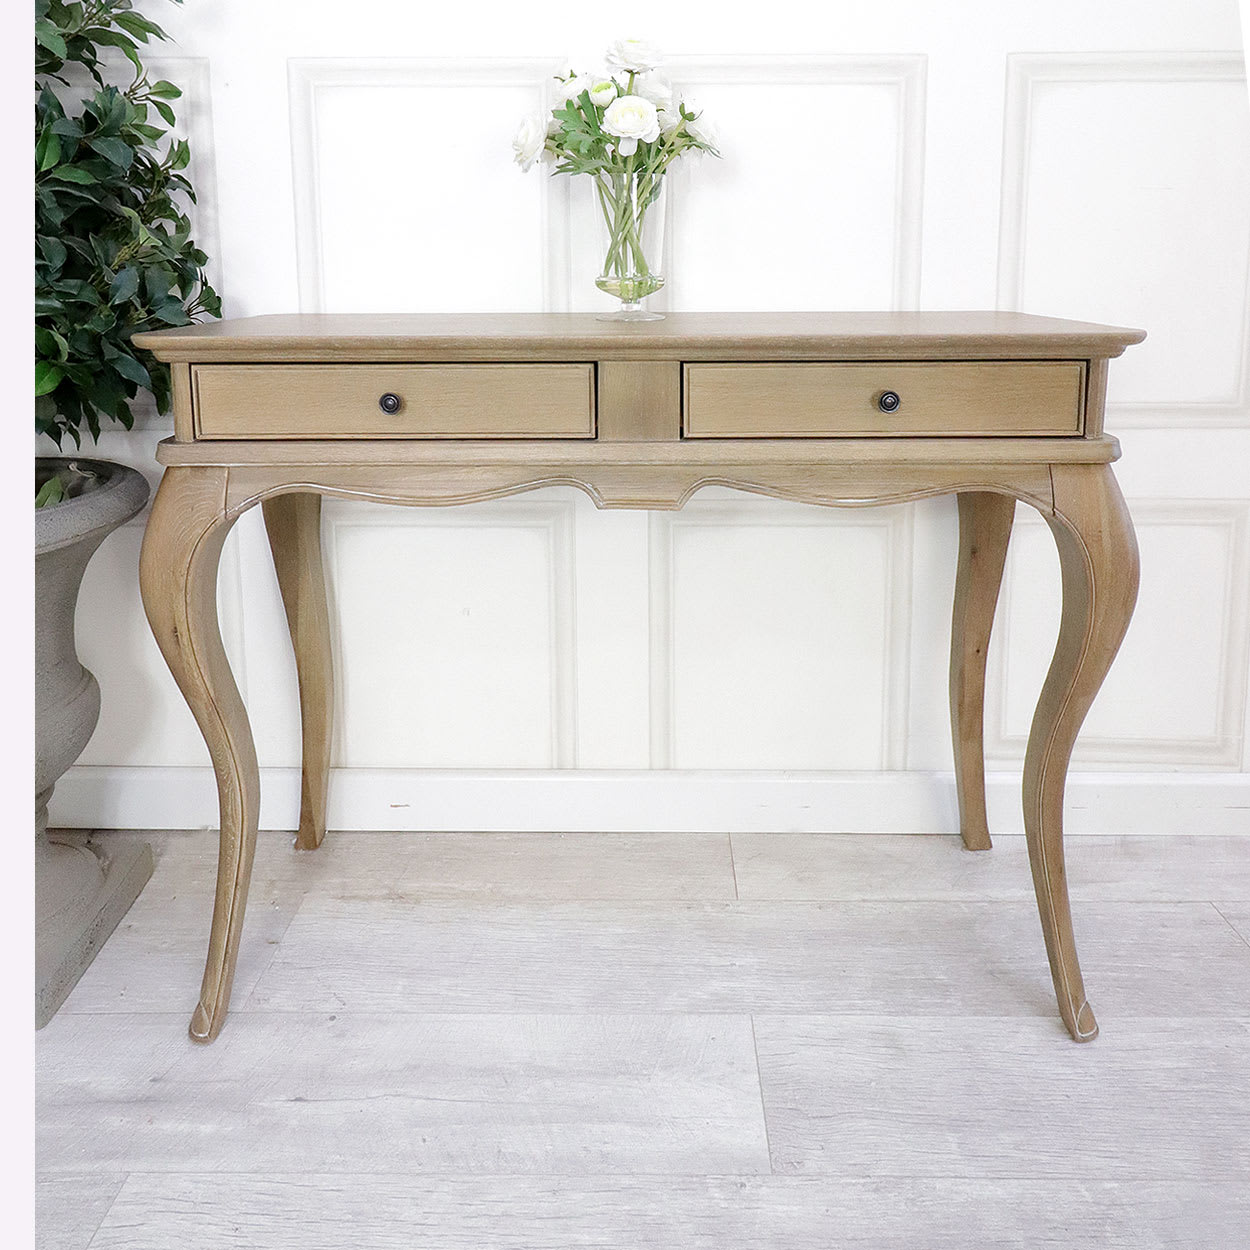 Willis & Gambier Camille 2 Drawer Hall Dressing Table Desk